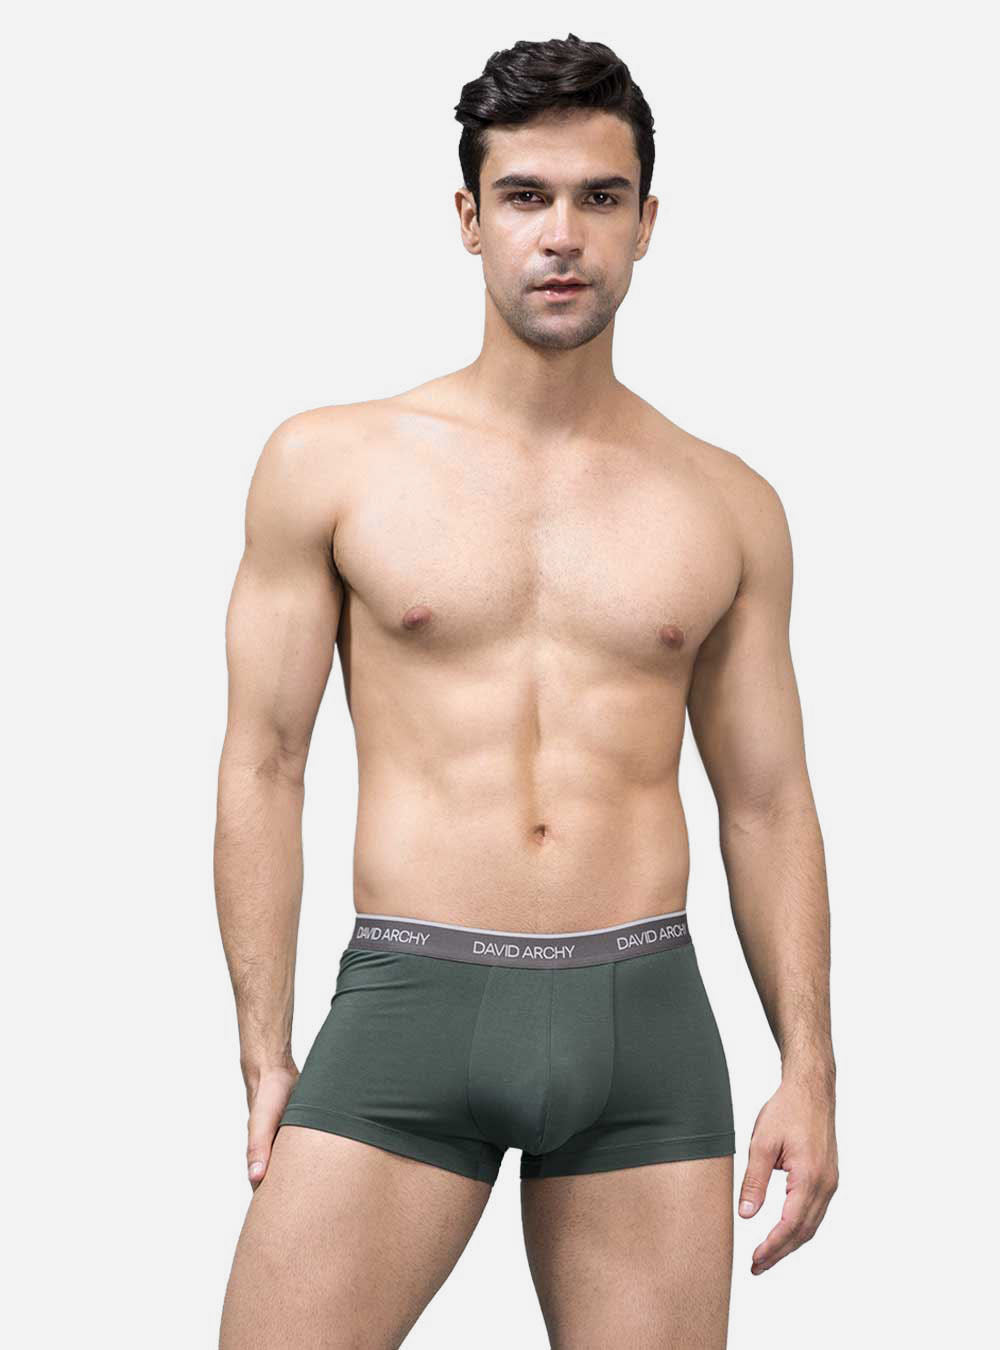 SIORO Men's 4 Pack Micro Modal Trunks with Ball Pouch, Ultra Soft